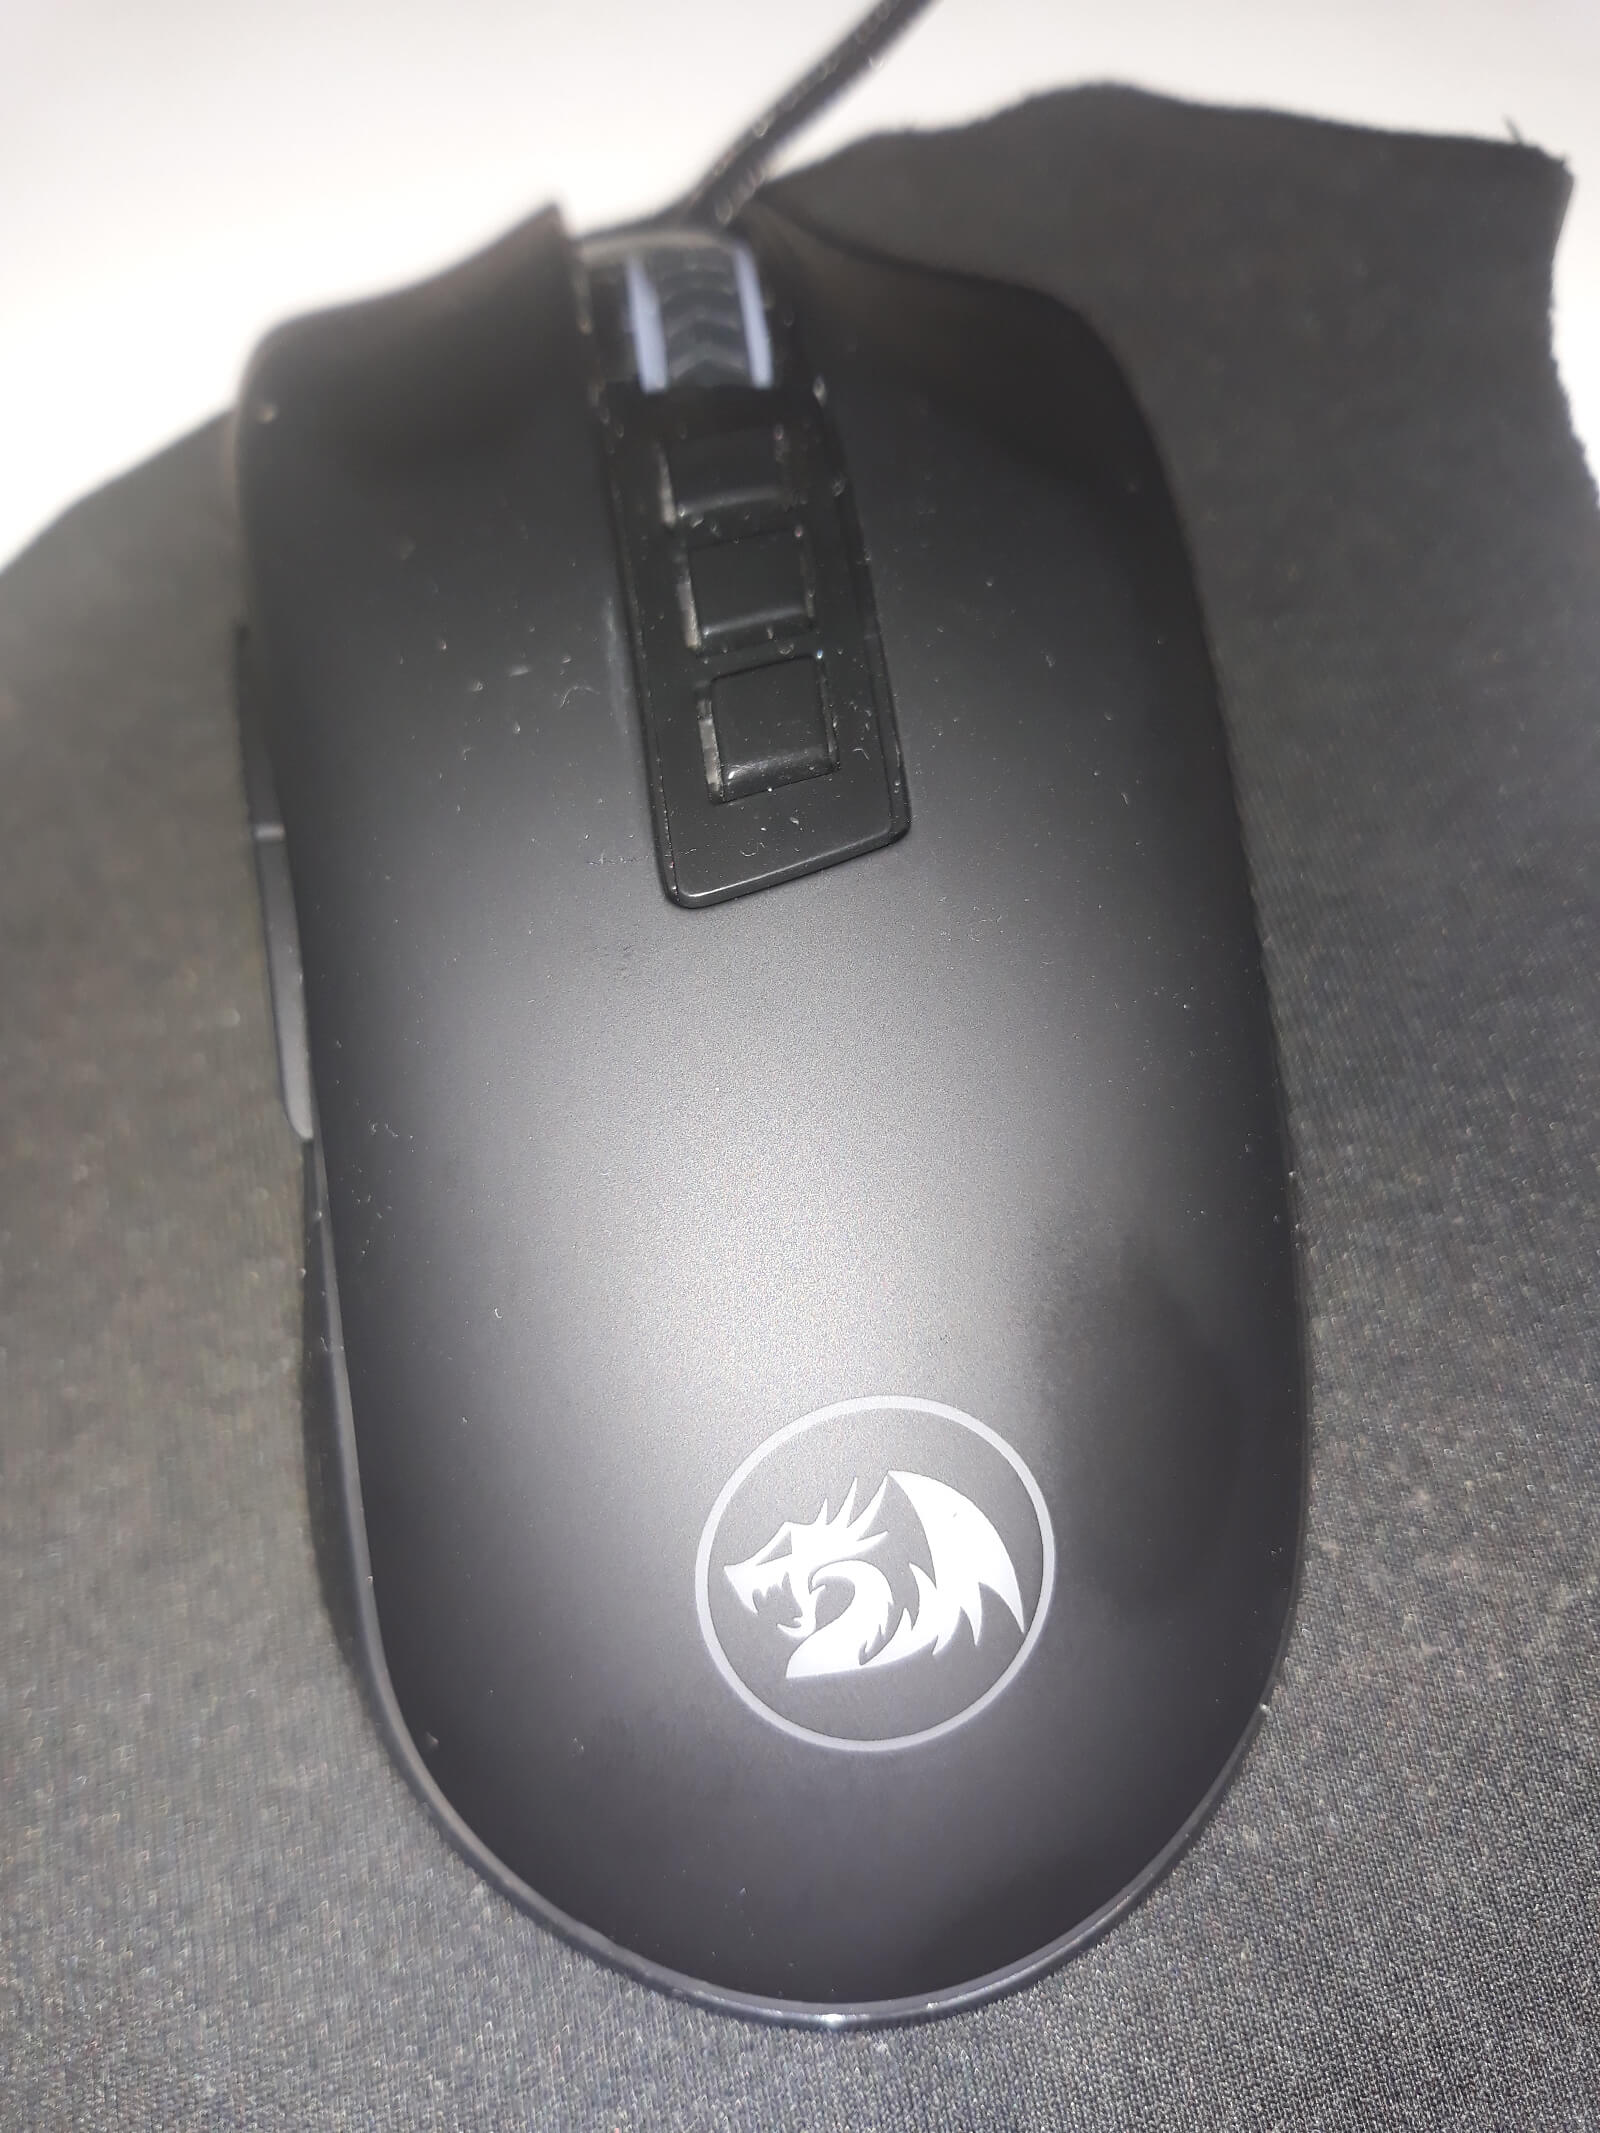 Mouse Redragon